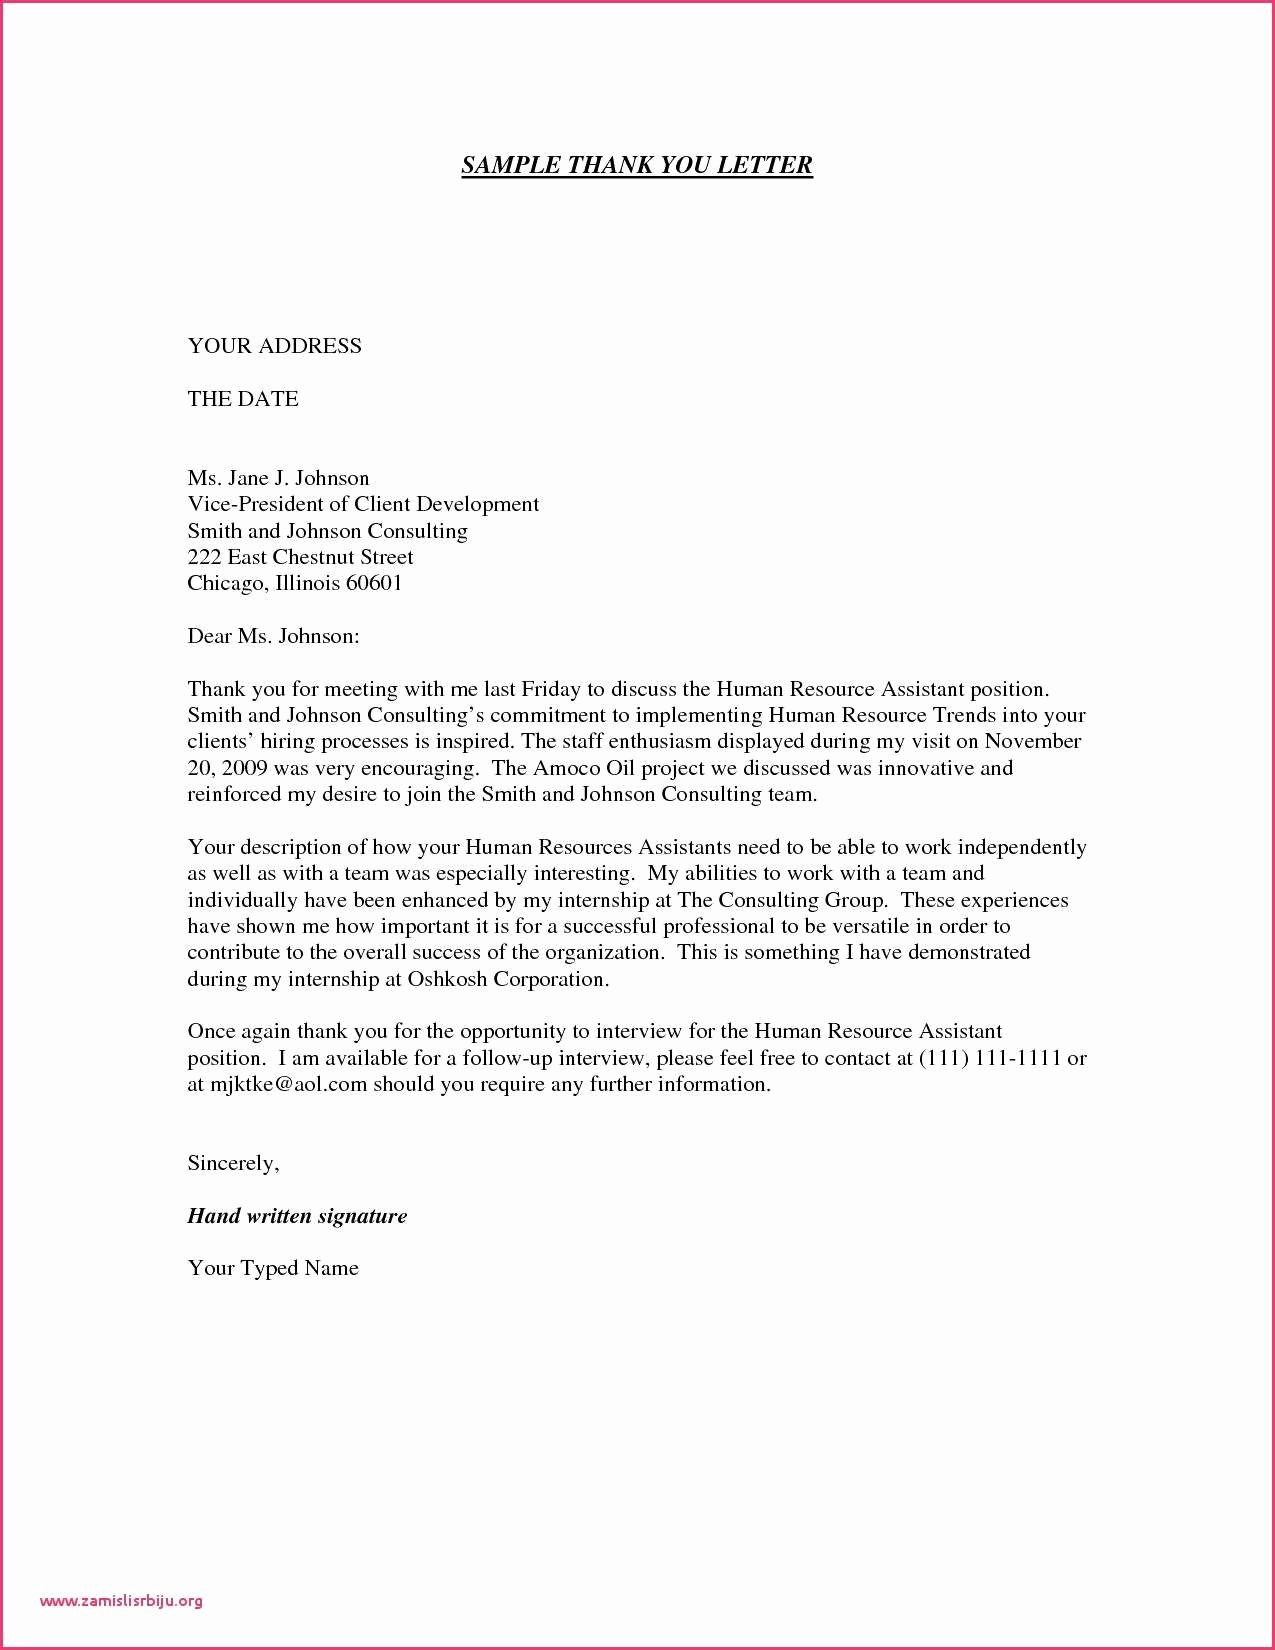 Sales associate Cover Letter Template Employment Cover